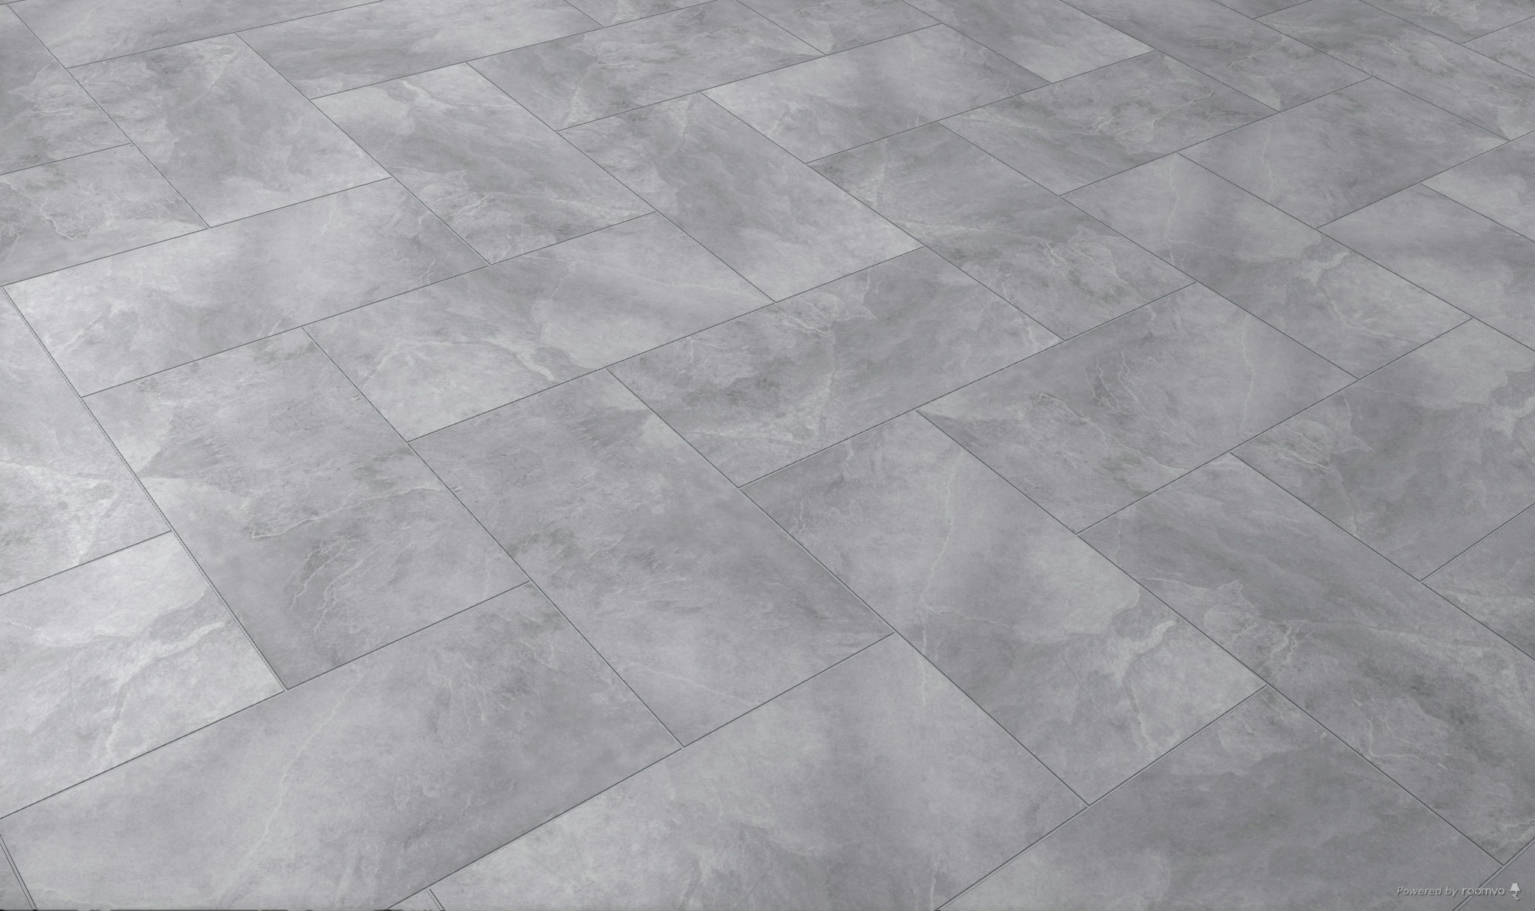 Ravello 12x24” Light Grey 1 | Qualis Ceramica | Luxury Tile and Vinyl at affordable prices